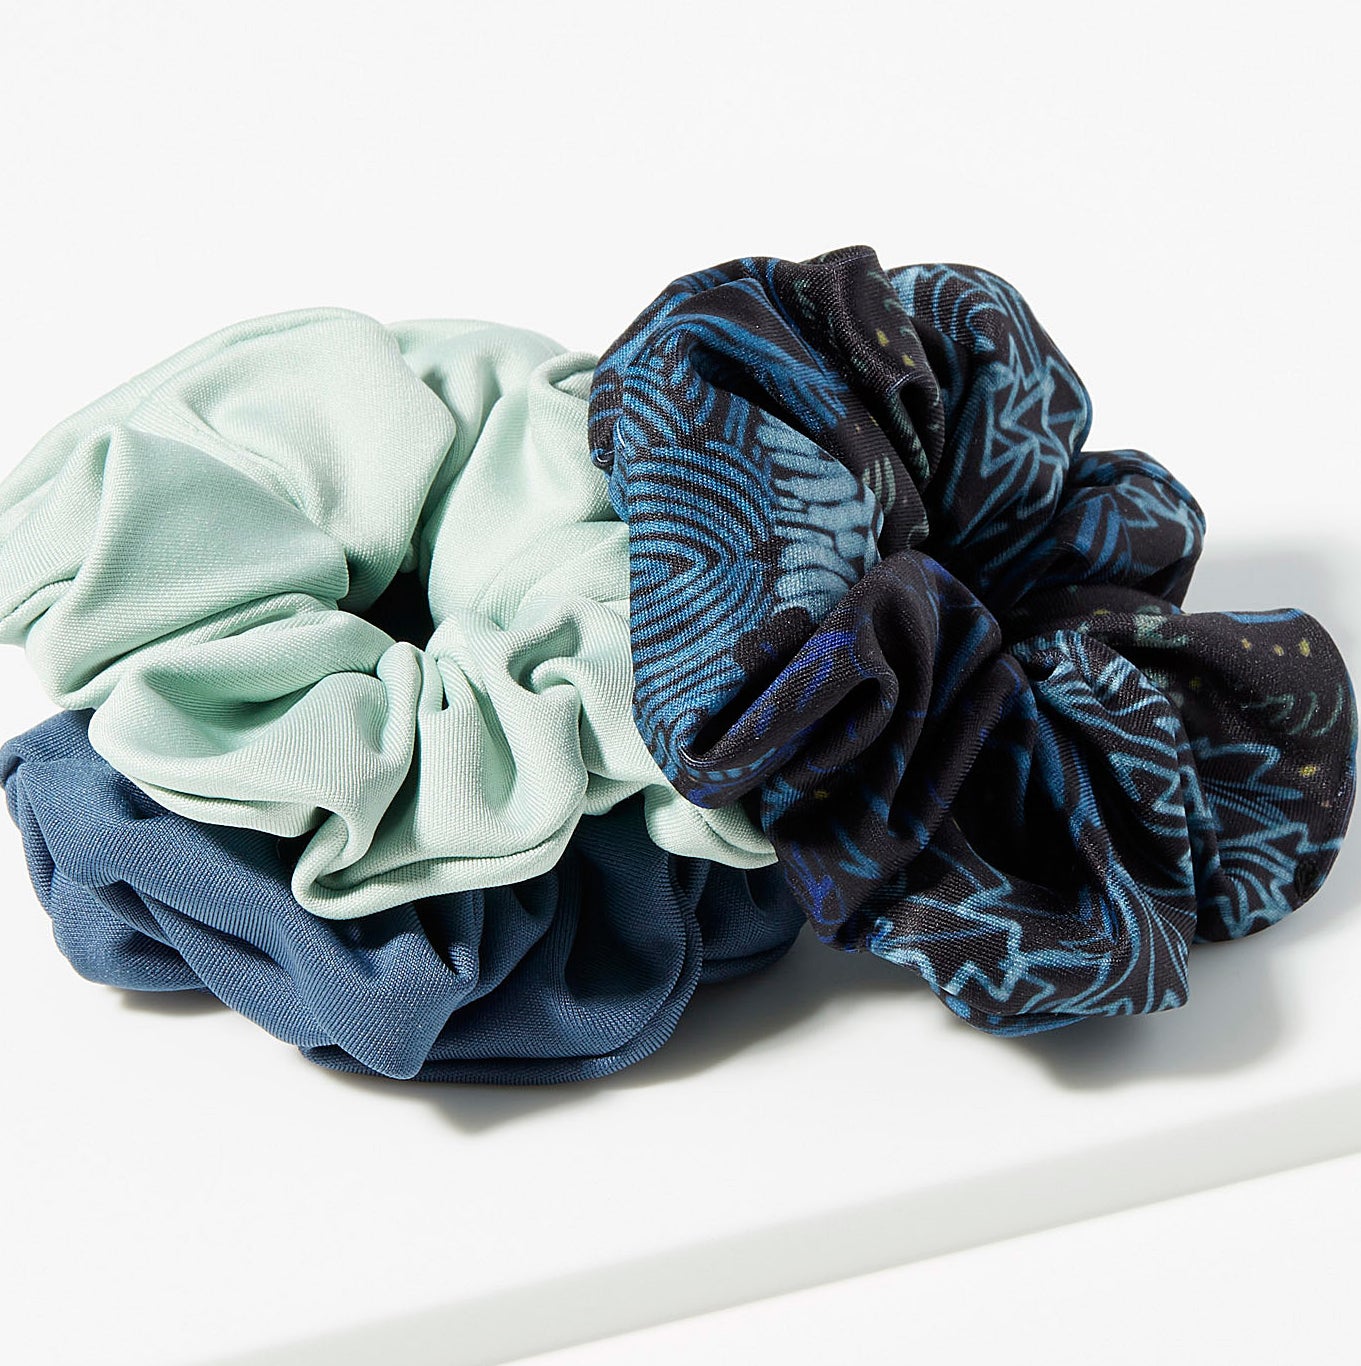 The three scrunchies in a pile on a table